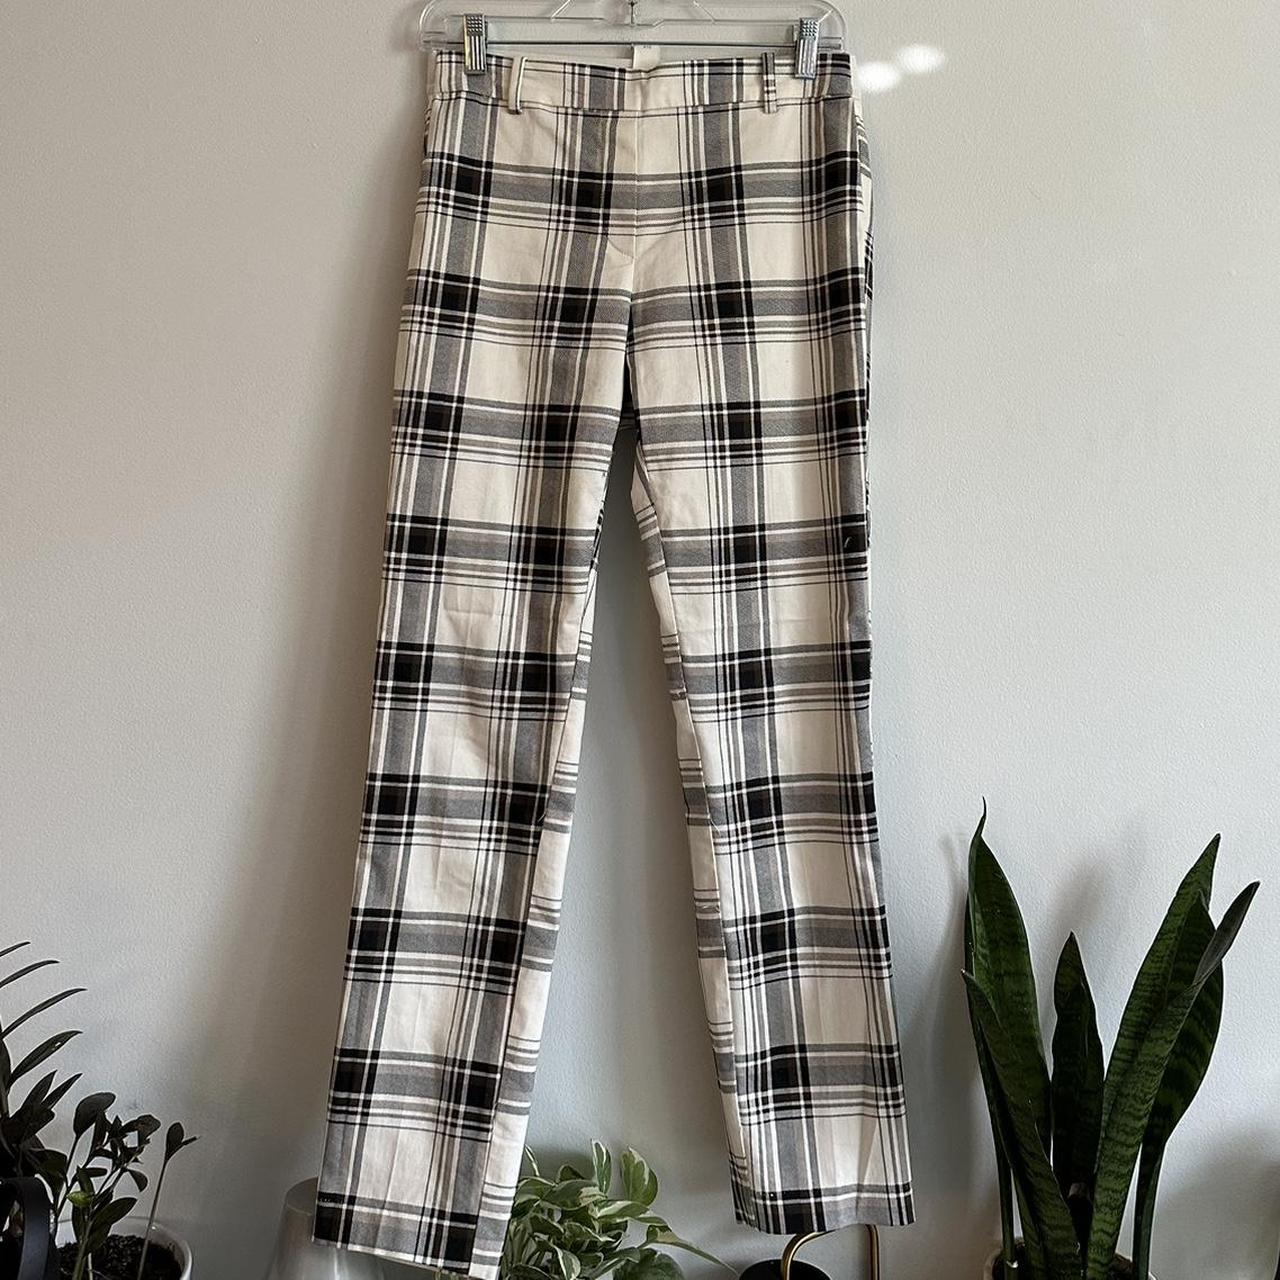 white and grey plaid pajama pants - in perfect - Depop